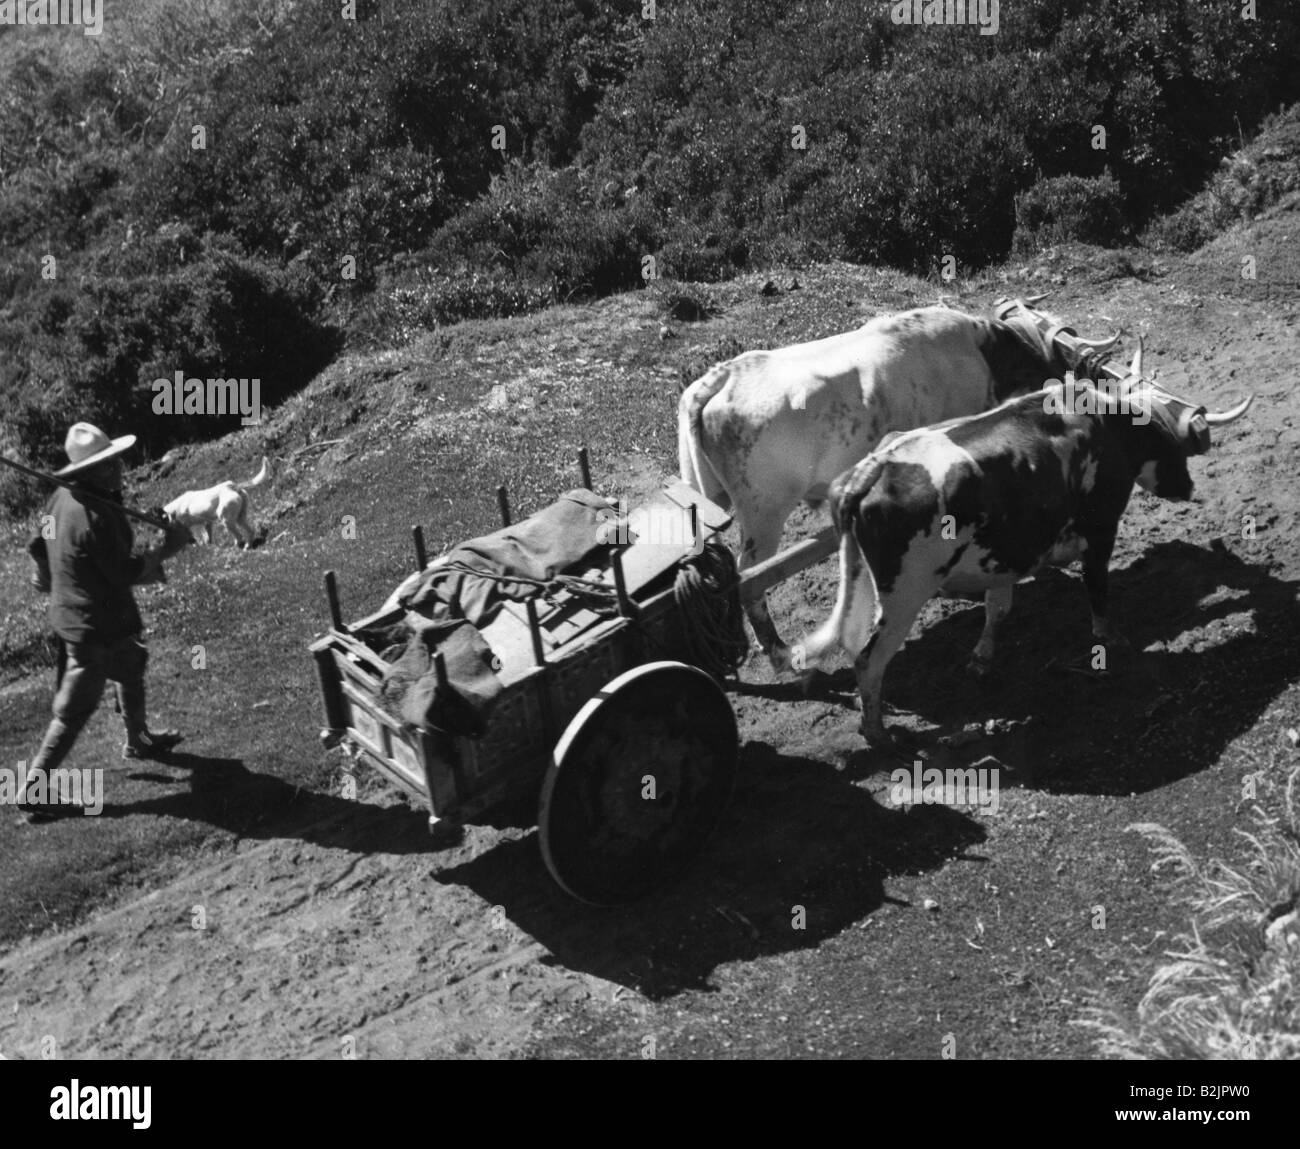 Ox cart costa rica Black and White Stock Photos & Images - Alamy